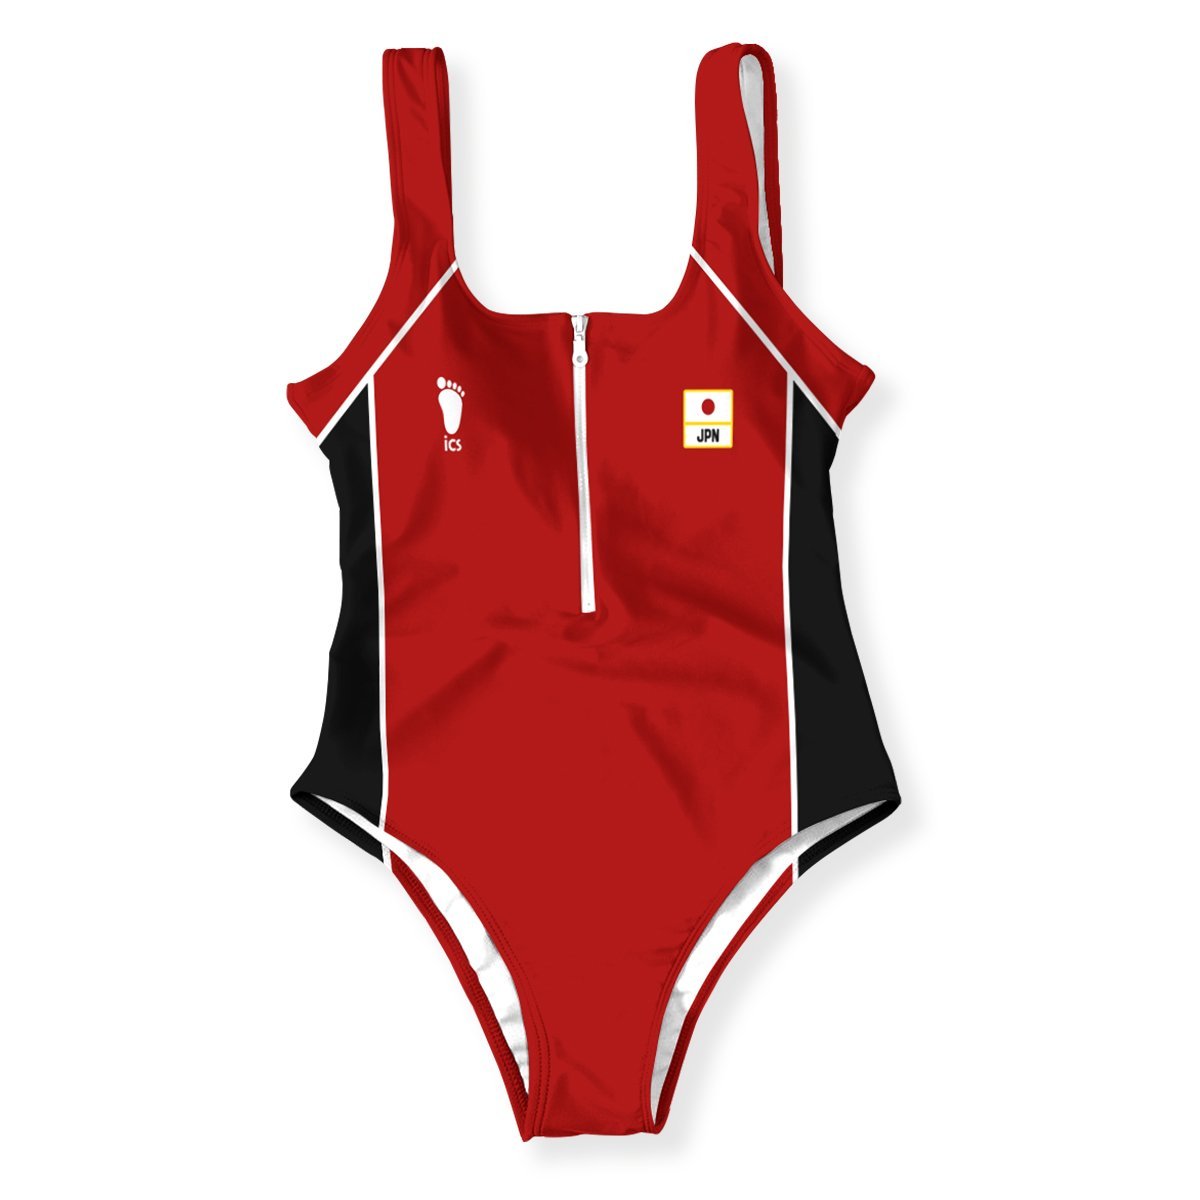 Haikyuu National Team One Piece Swimsuit FDM3107 XS Official Anime Swimsuit Merch